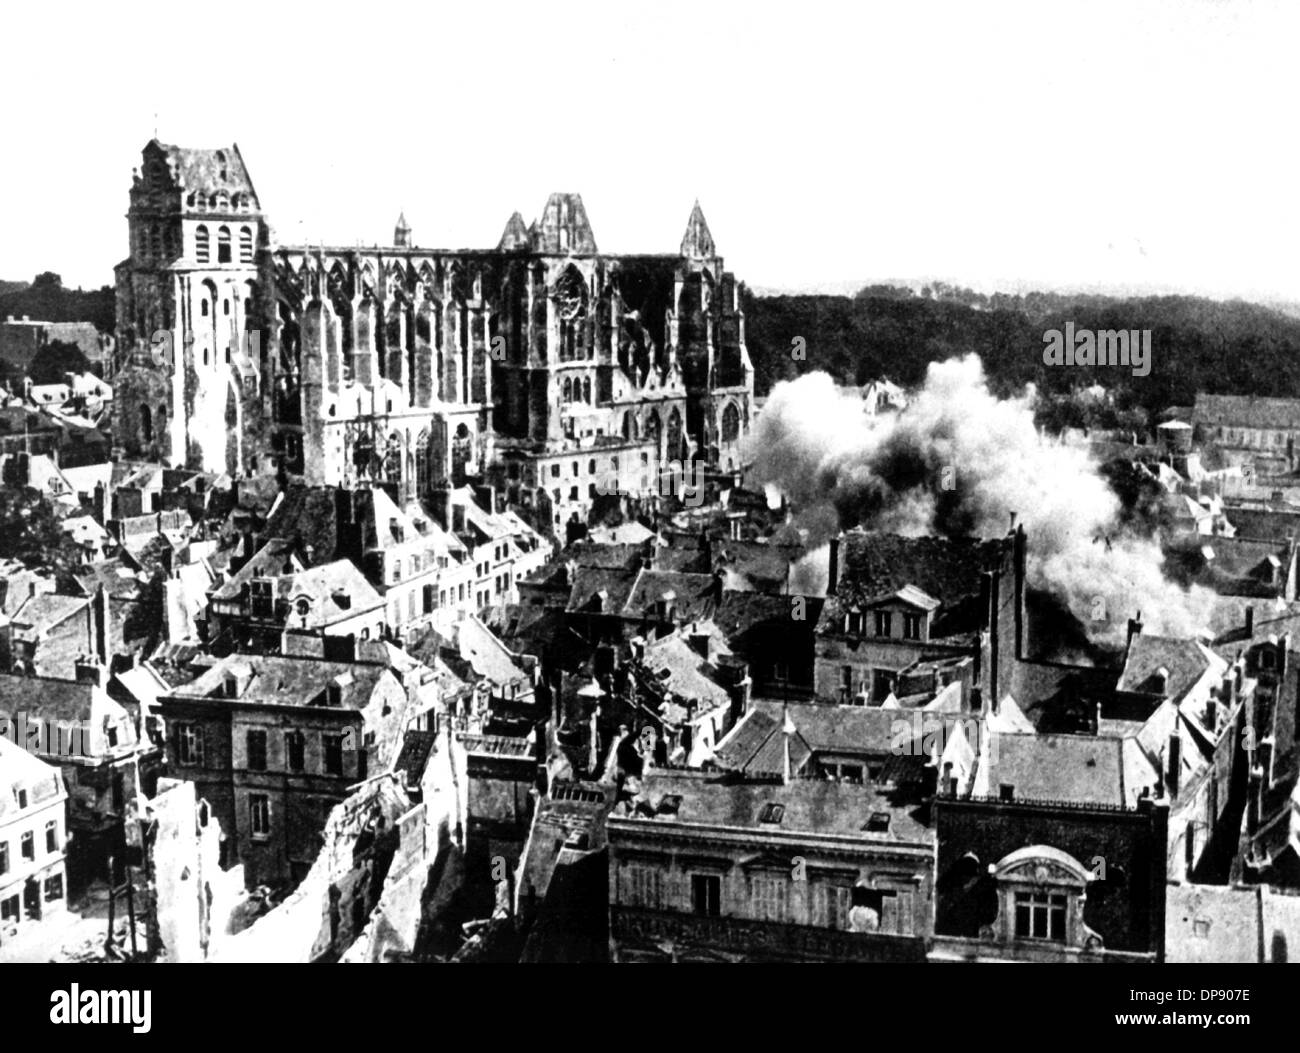 View of the town St. Quentin on the 28th of August in 1914, occupied by the German troops. St. Quentin held out until the 2nd of October in 1918, but was almost completely destroyed by French gunfire. Set off by the deadly shots on Austrian heir to the throne Franz Ferdinand by Serbian nationalists on the 28th of June in 1914 in Sarajevo, World War I broke out. During World War I, Germany, Austria, Austria-Hungary as well as later Turkey and Bulgary fought against Britain, France and Russia. The sad end result in 1918 comprised roughly 8.5 million soldiers killed in action, more than 21 millio Stock Photo